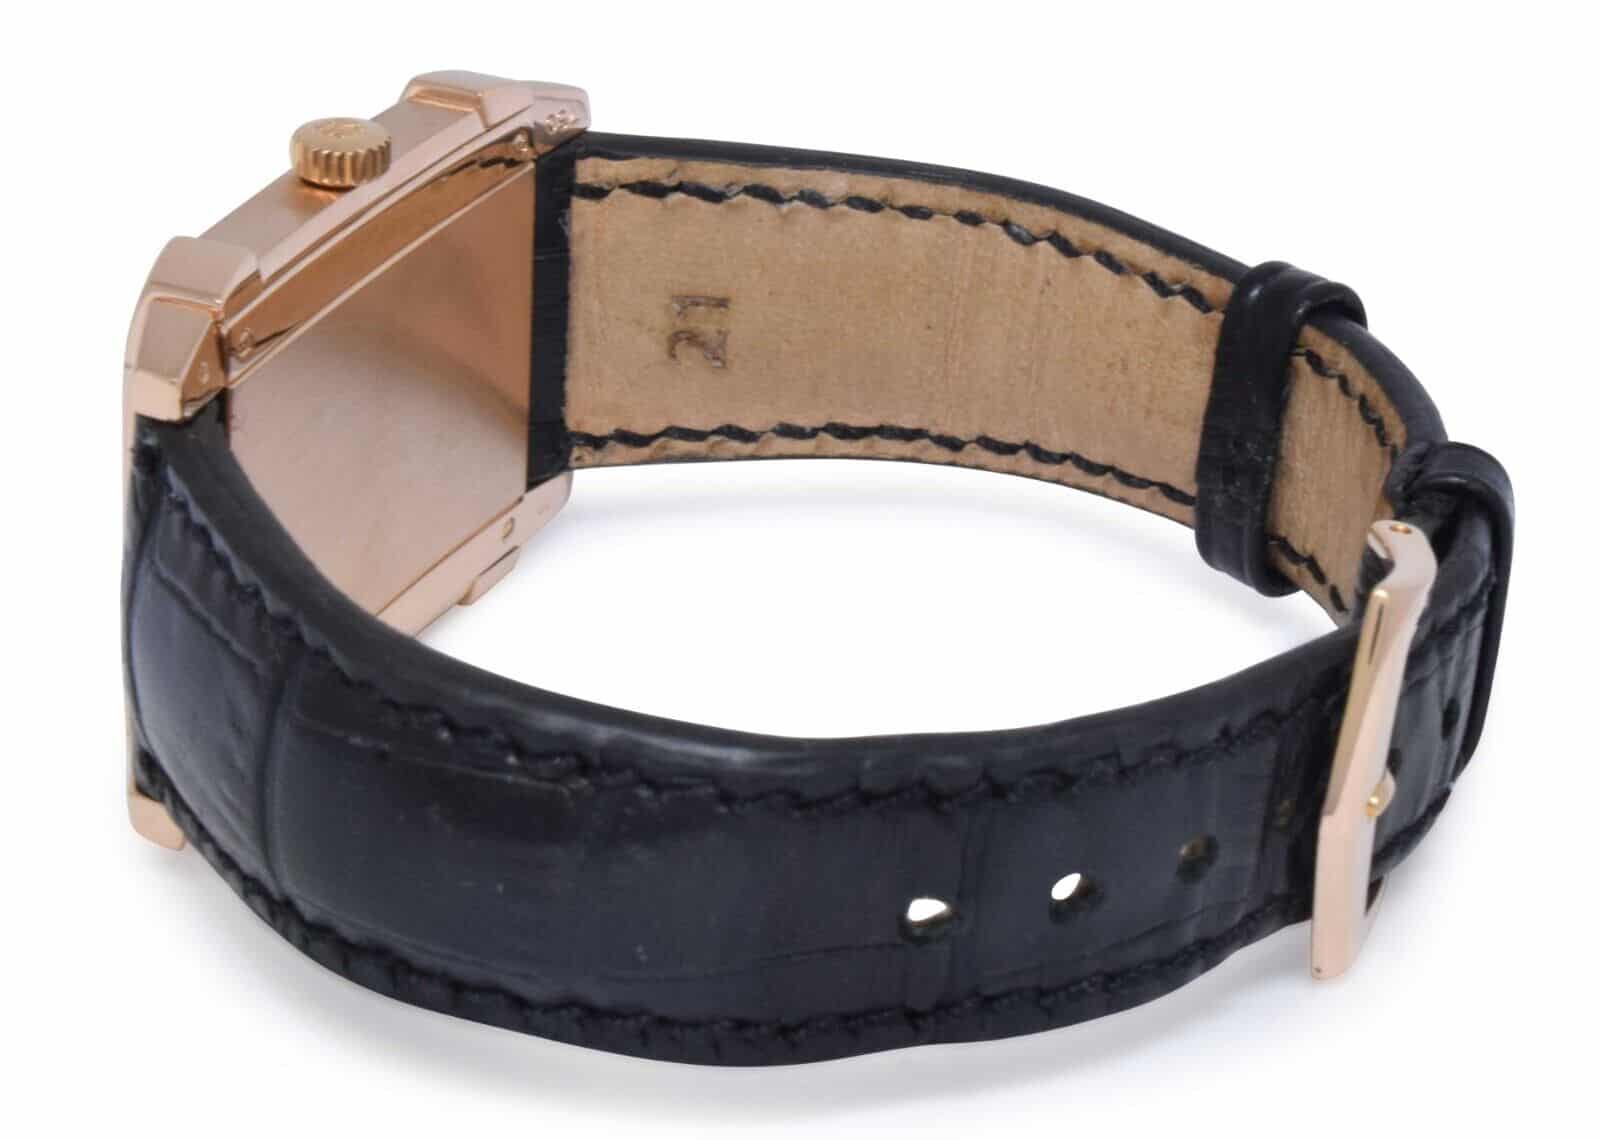 Sold at Auction: Pair of Gucci Style Designer Dog Collars